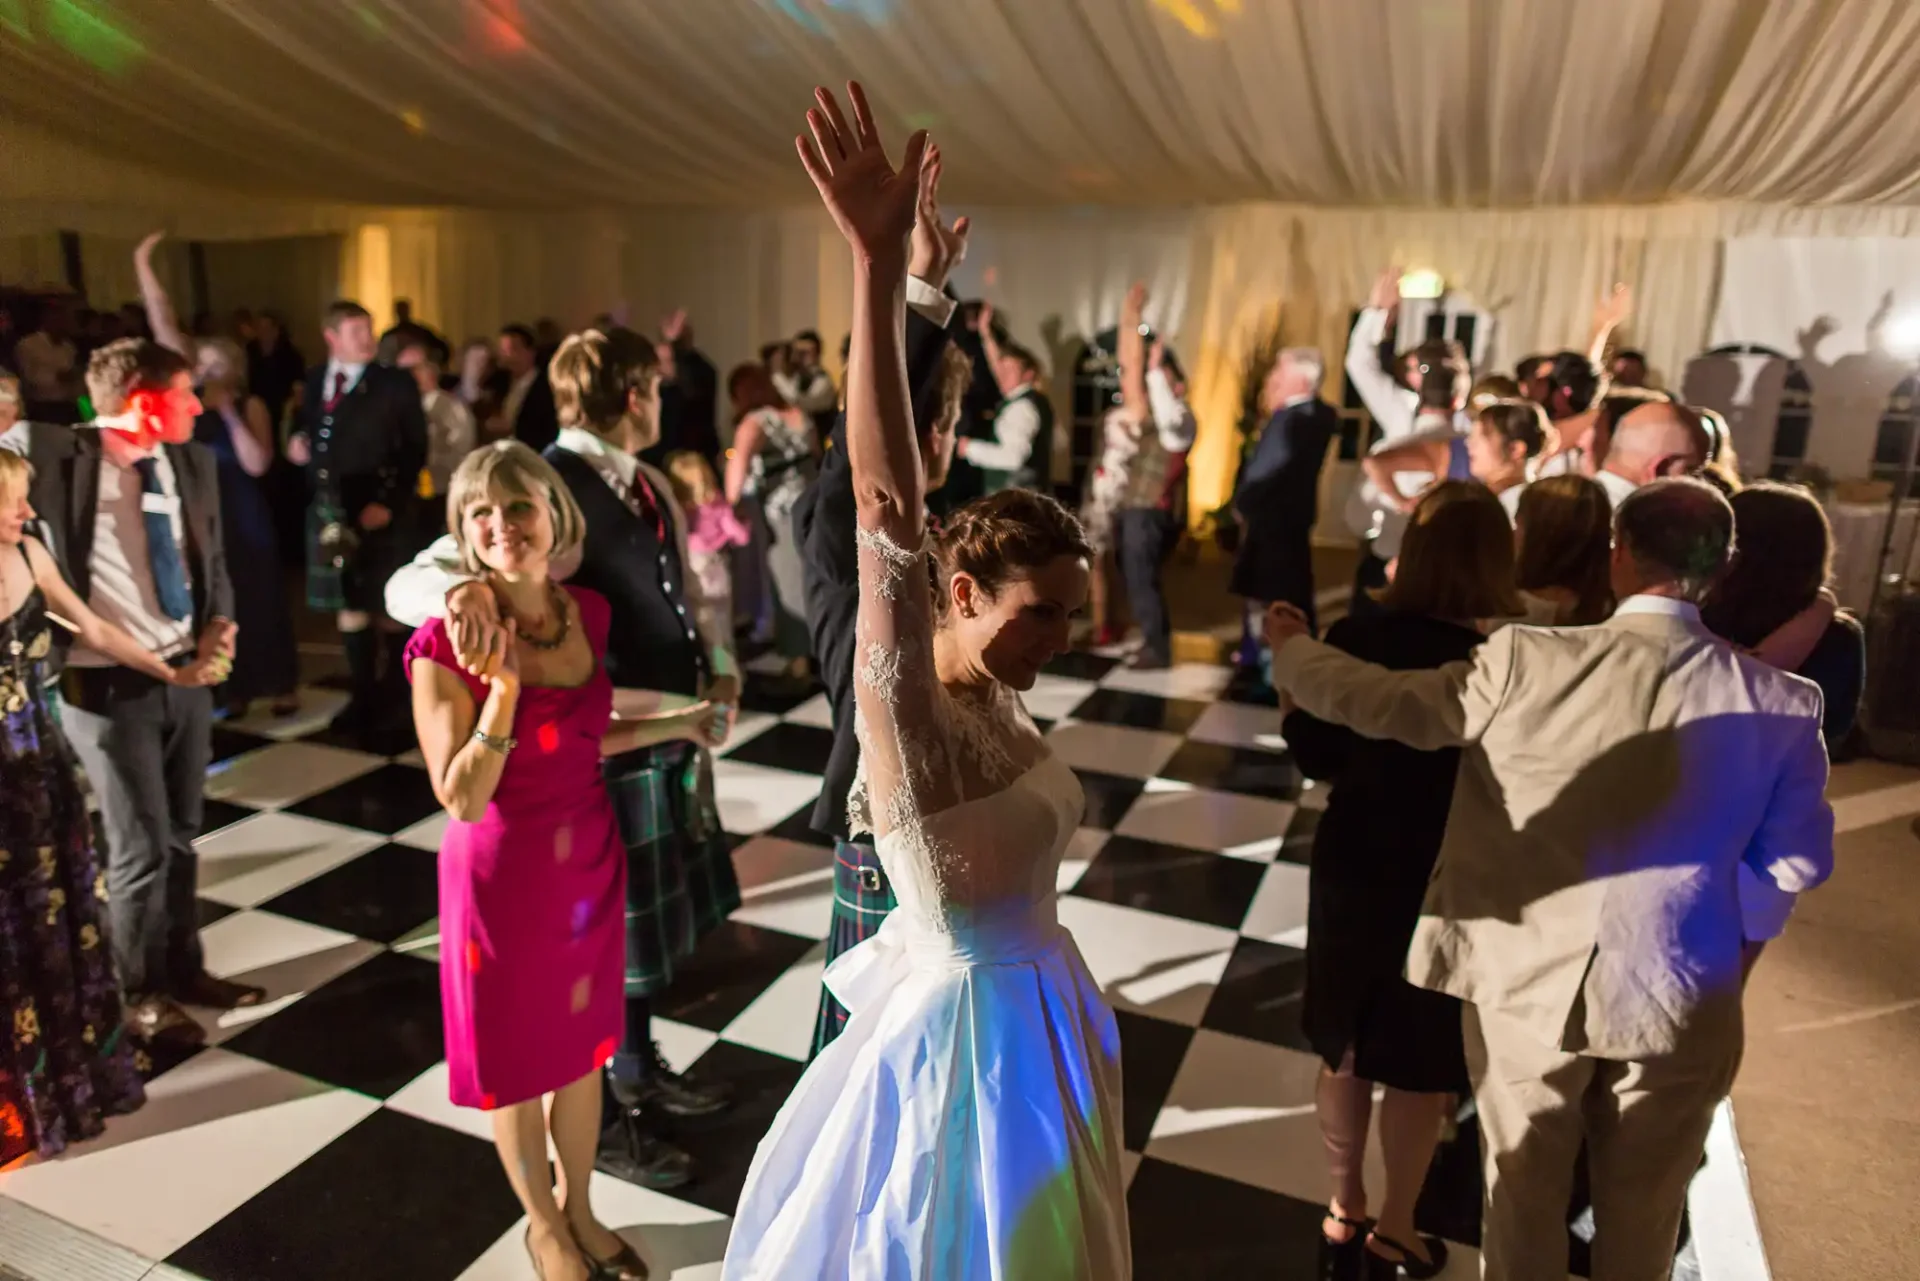 A bride joyfully dancing with raised arms in a crowded reception tent with guests surrounding her, illuminated by warm lights.